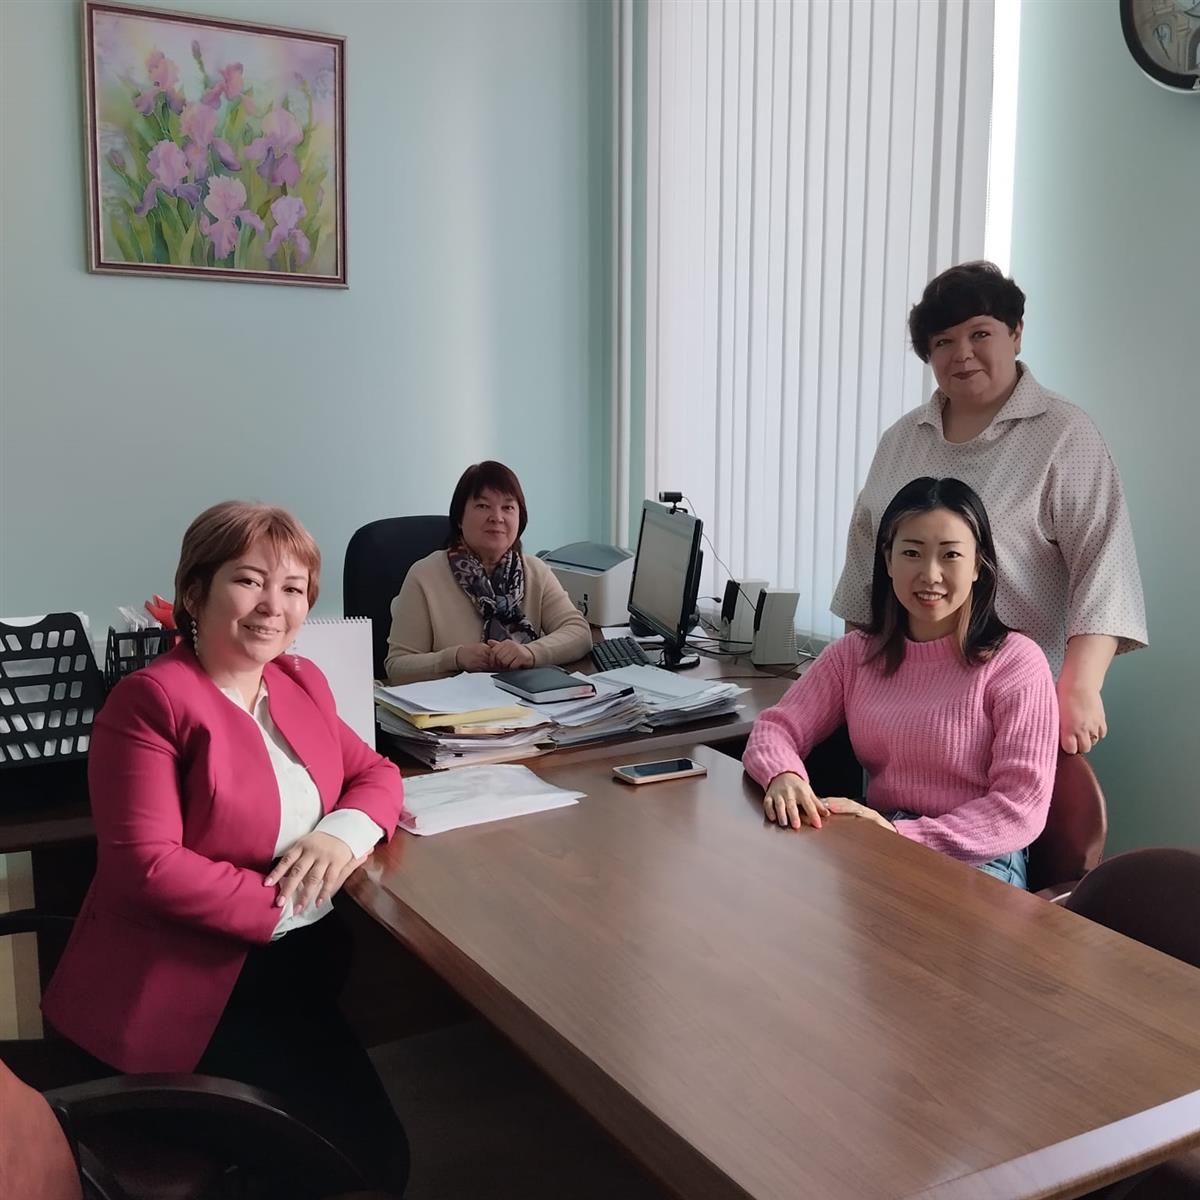 A meeting was held with Burenina Natalya Viktorovna, Dean of the Faculty of Foreign Philology of  N.P. Ogarev State Research University of Mordovia